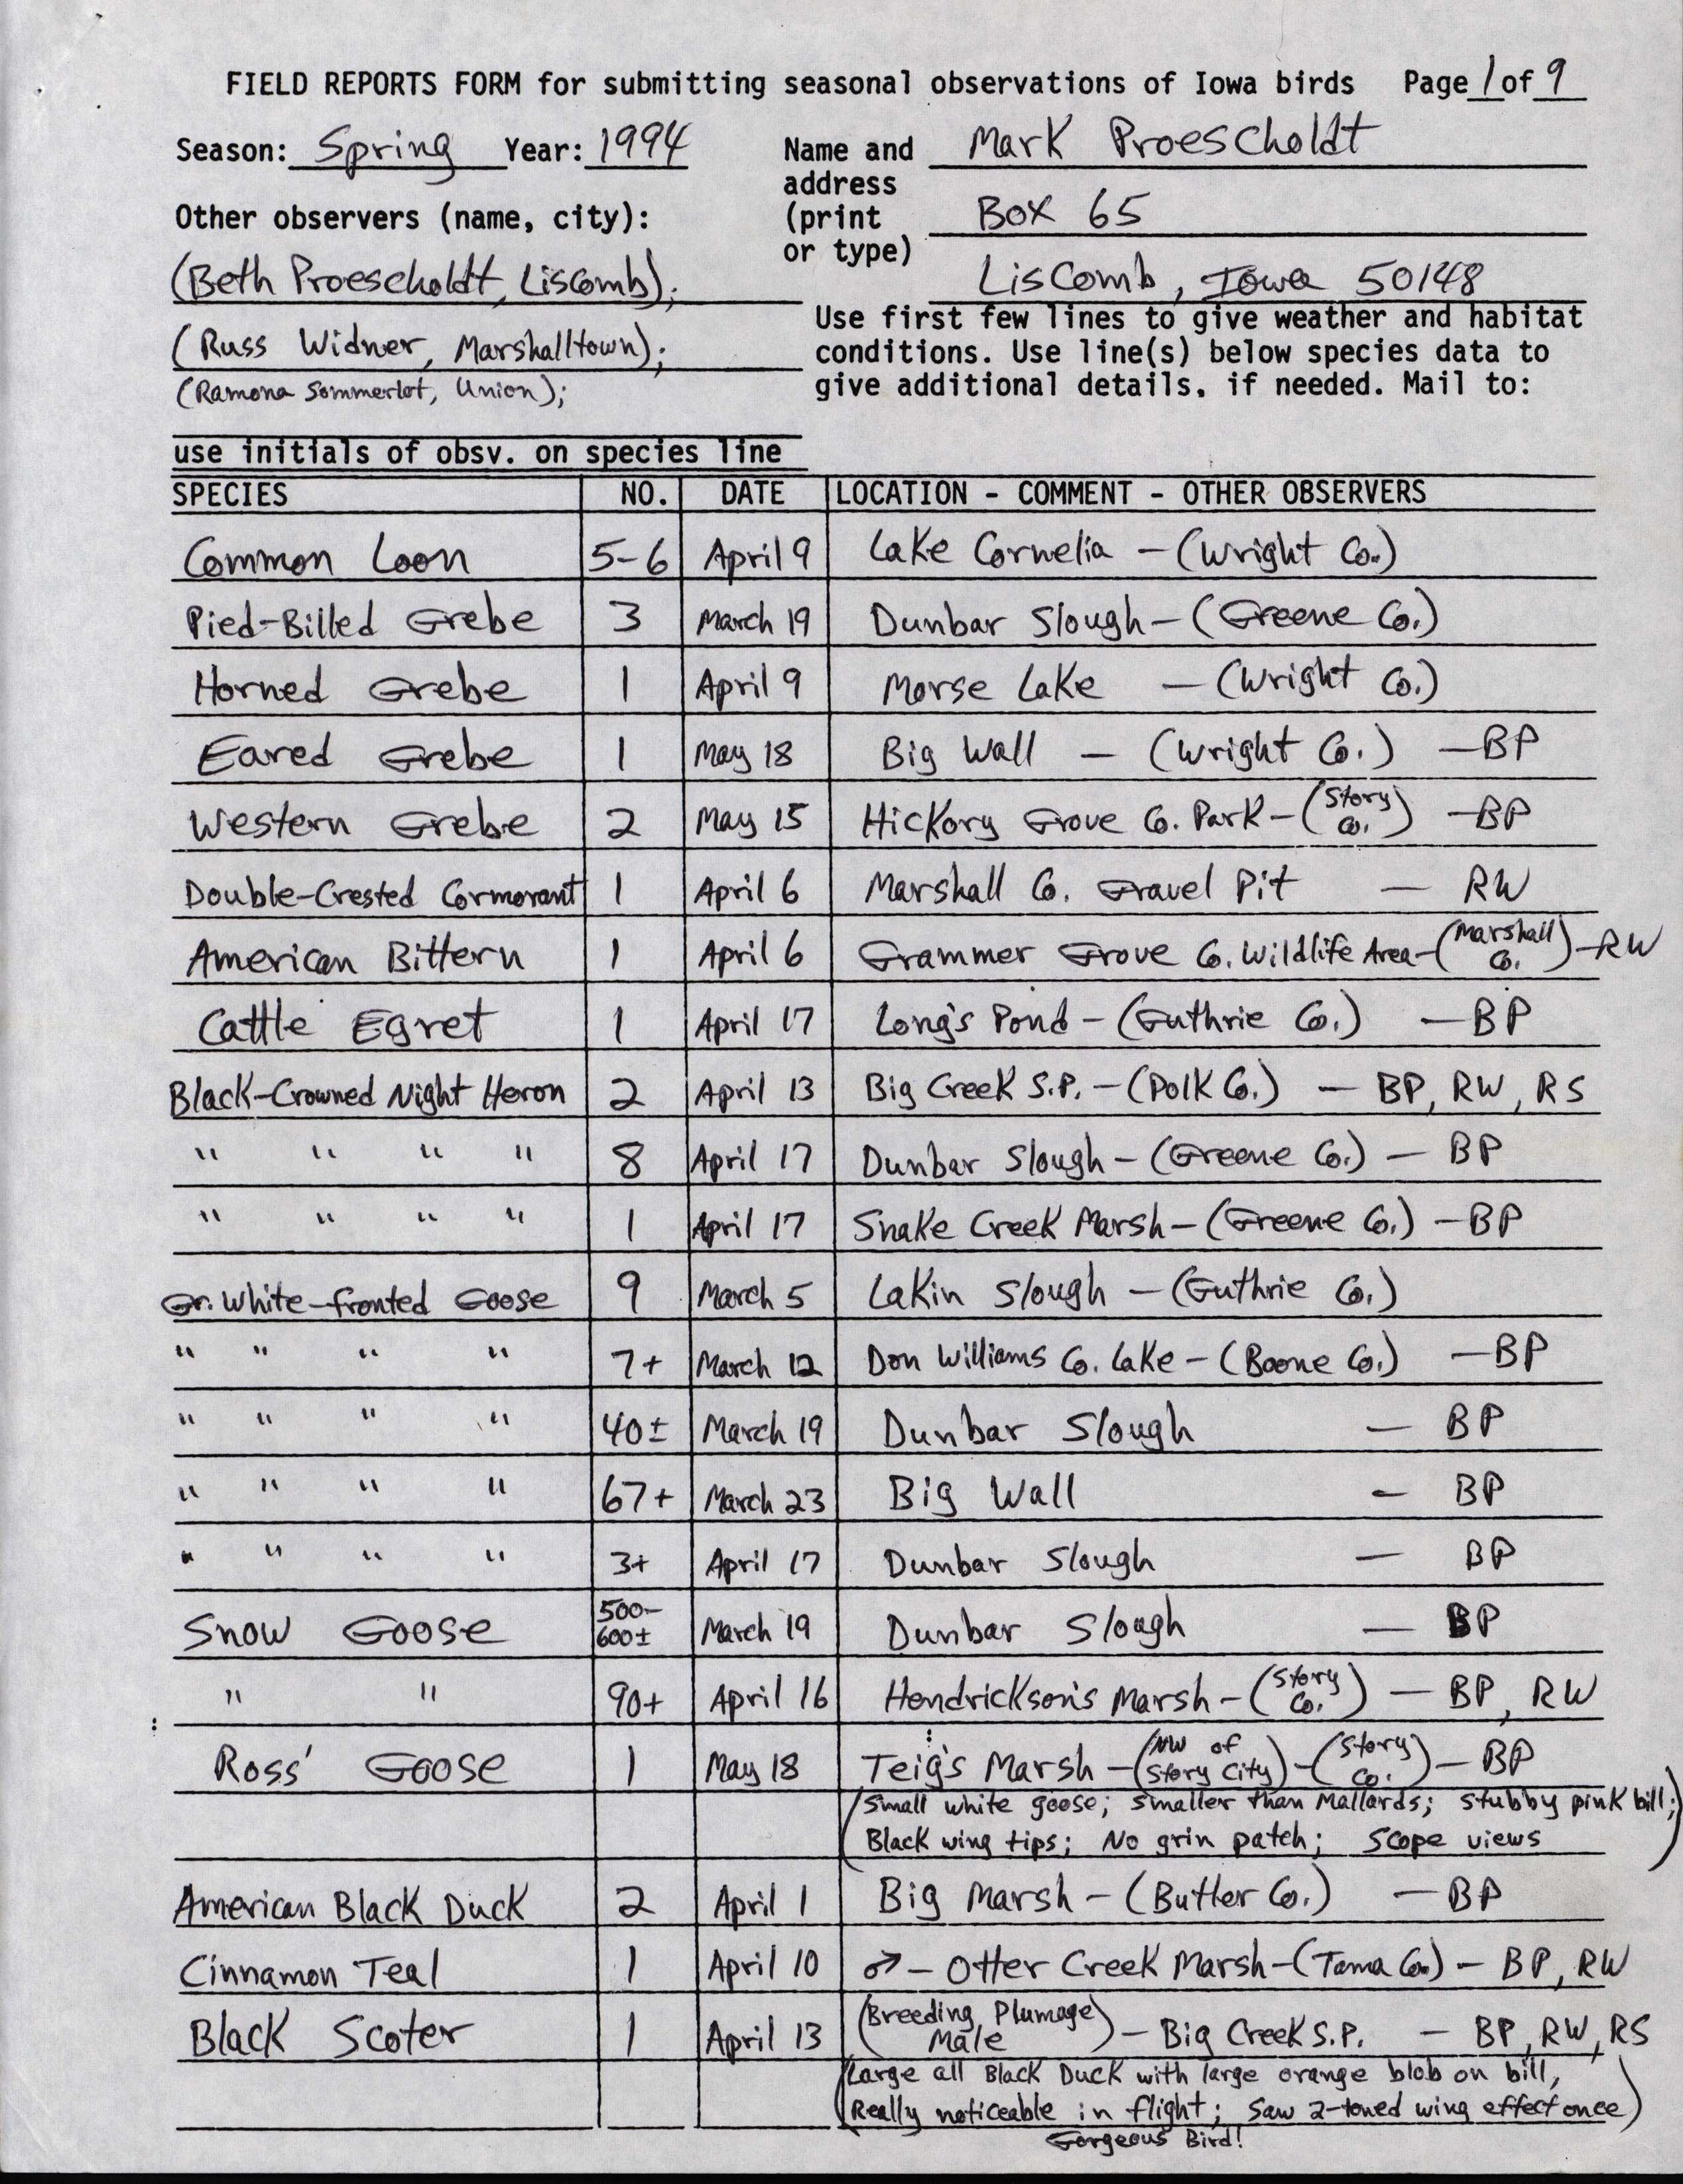 Field reports form for submitting seasonal observations of Iowa birds, Mark Proescholdt, Spring 1994